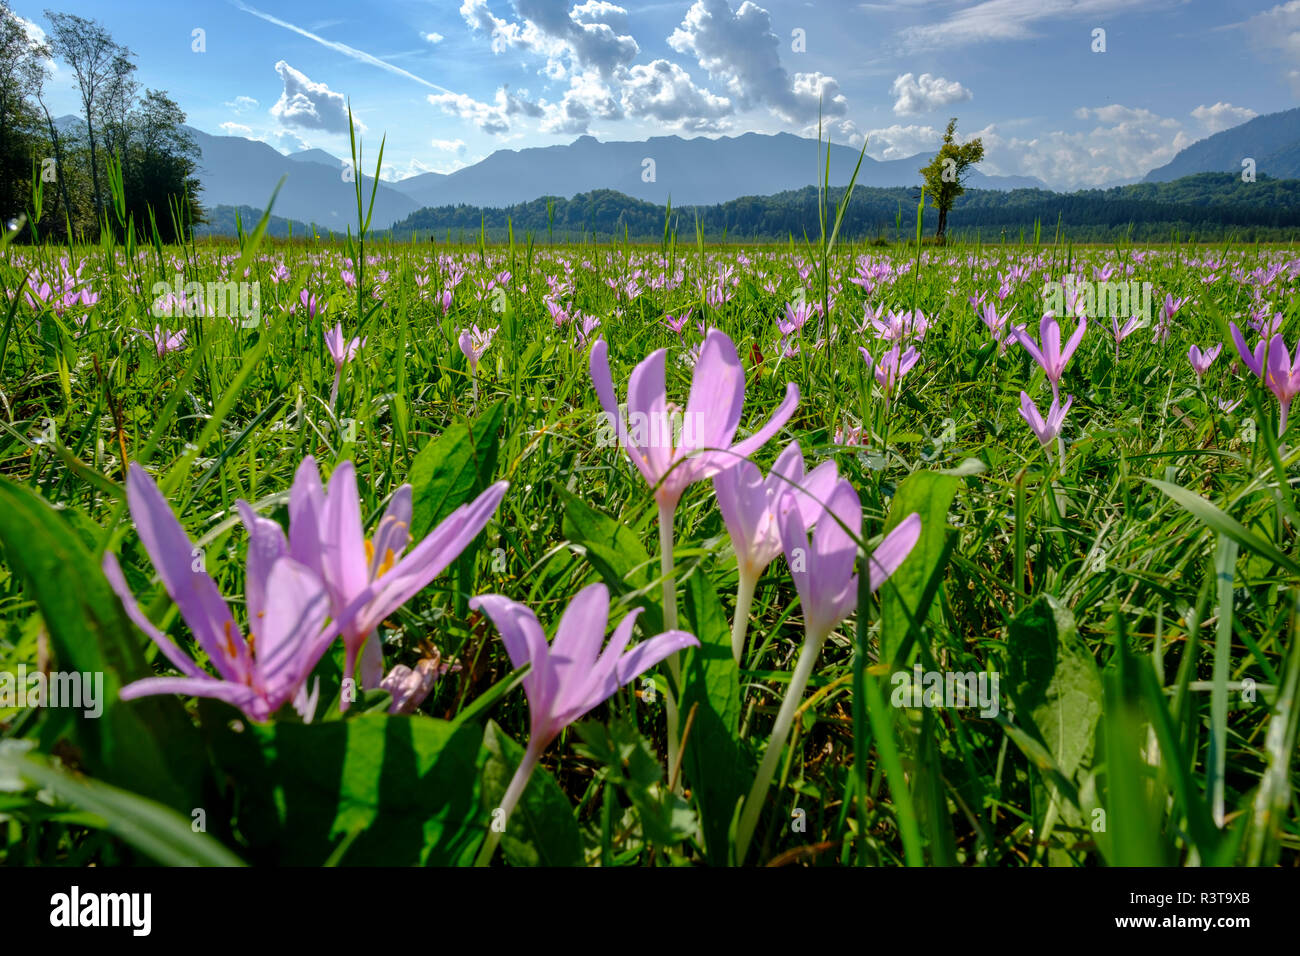 Germany, Bavaria, Murnauer Moos, Meadow saffron growing in the field Stock Photo